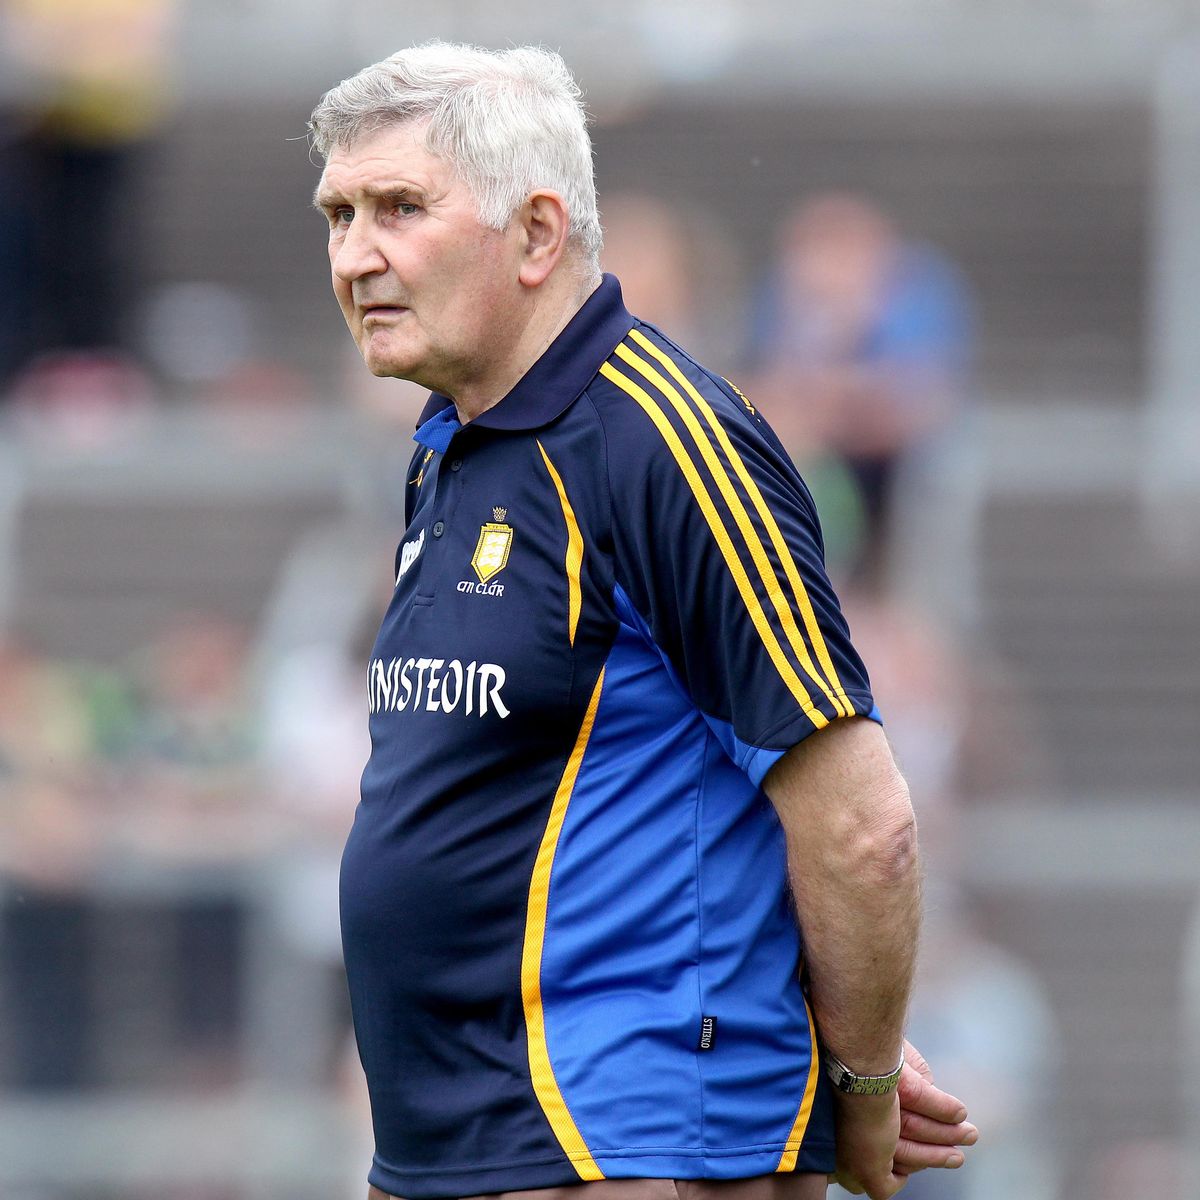 Mick O Dwyer Health And Illness: Is He Still Alive?